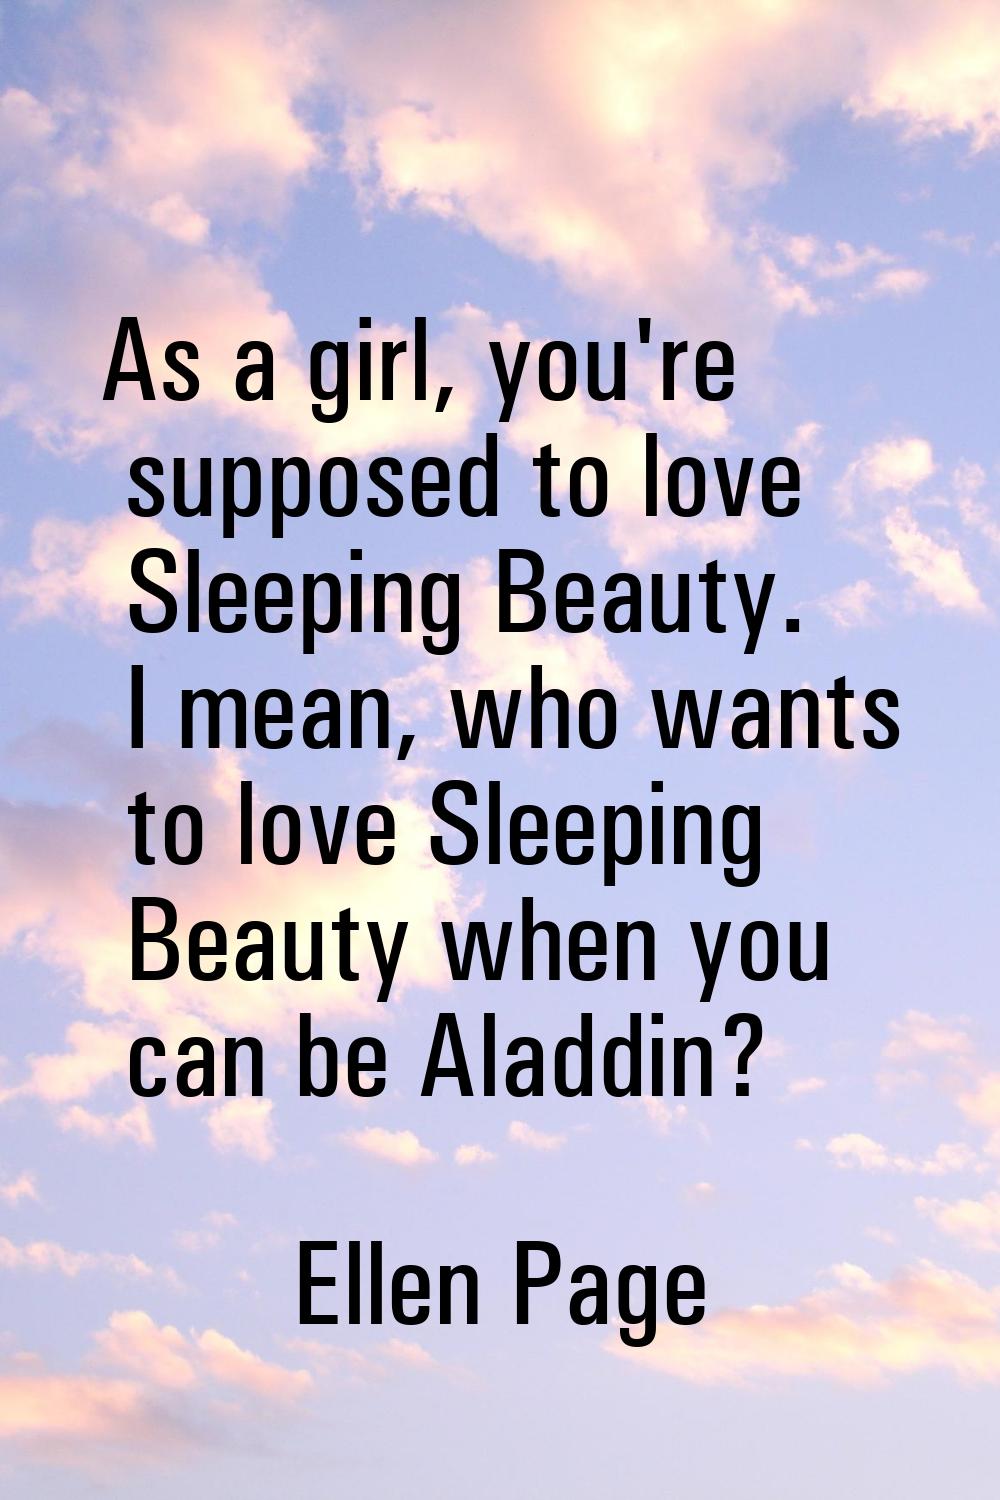 As a girl, you're supposed to love Sleeping Beauty. I mean, who wants to love Sleeping Beauty when 